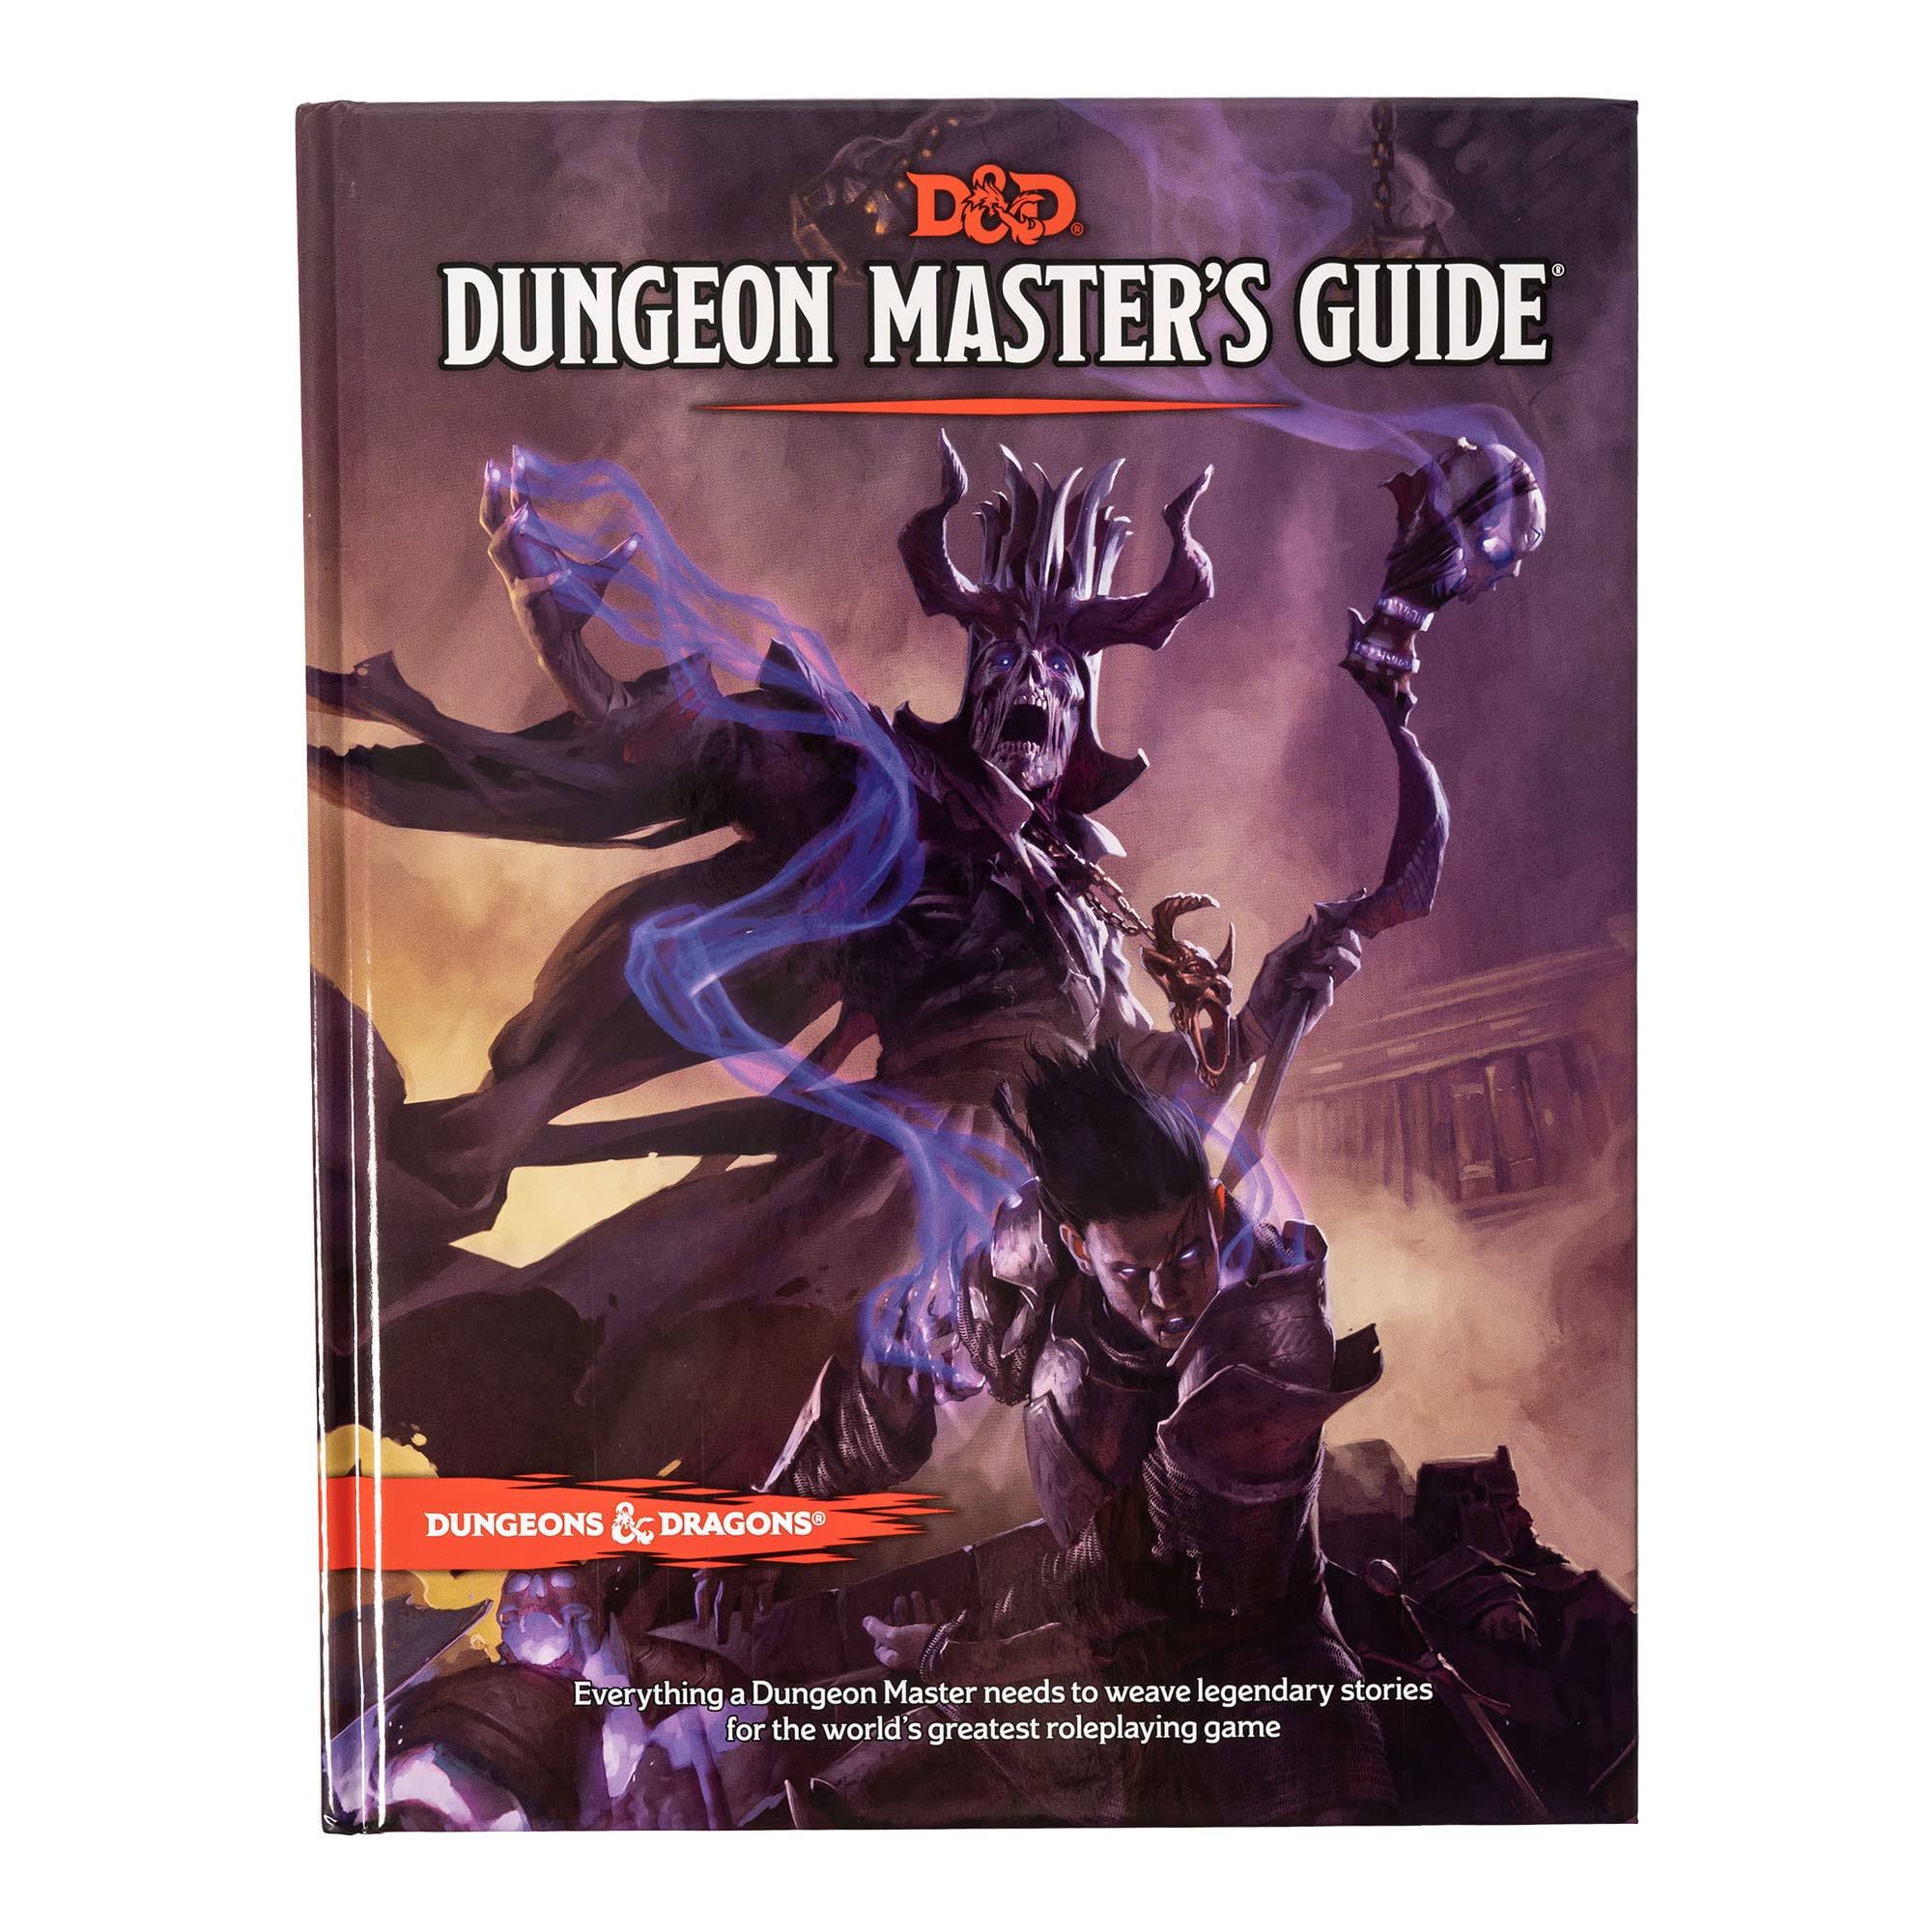 Dungeon Master's Guide [Book]